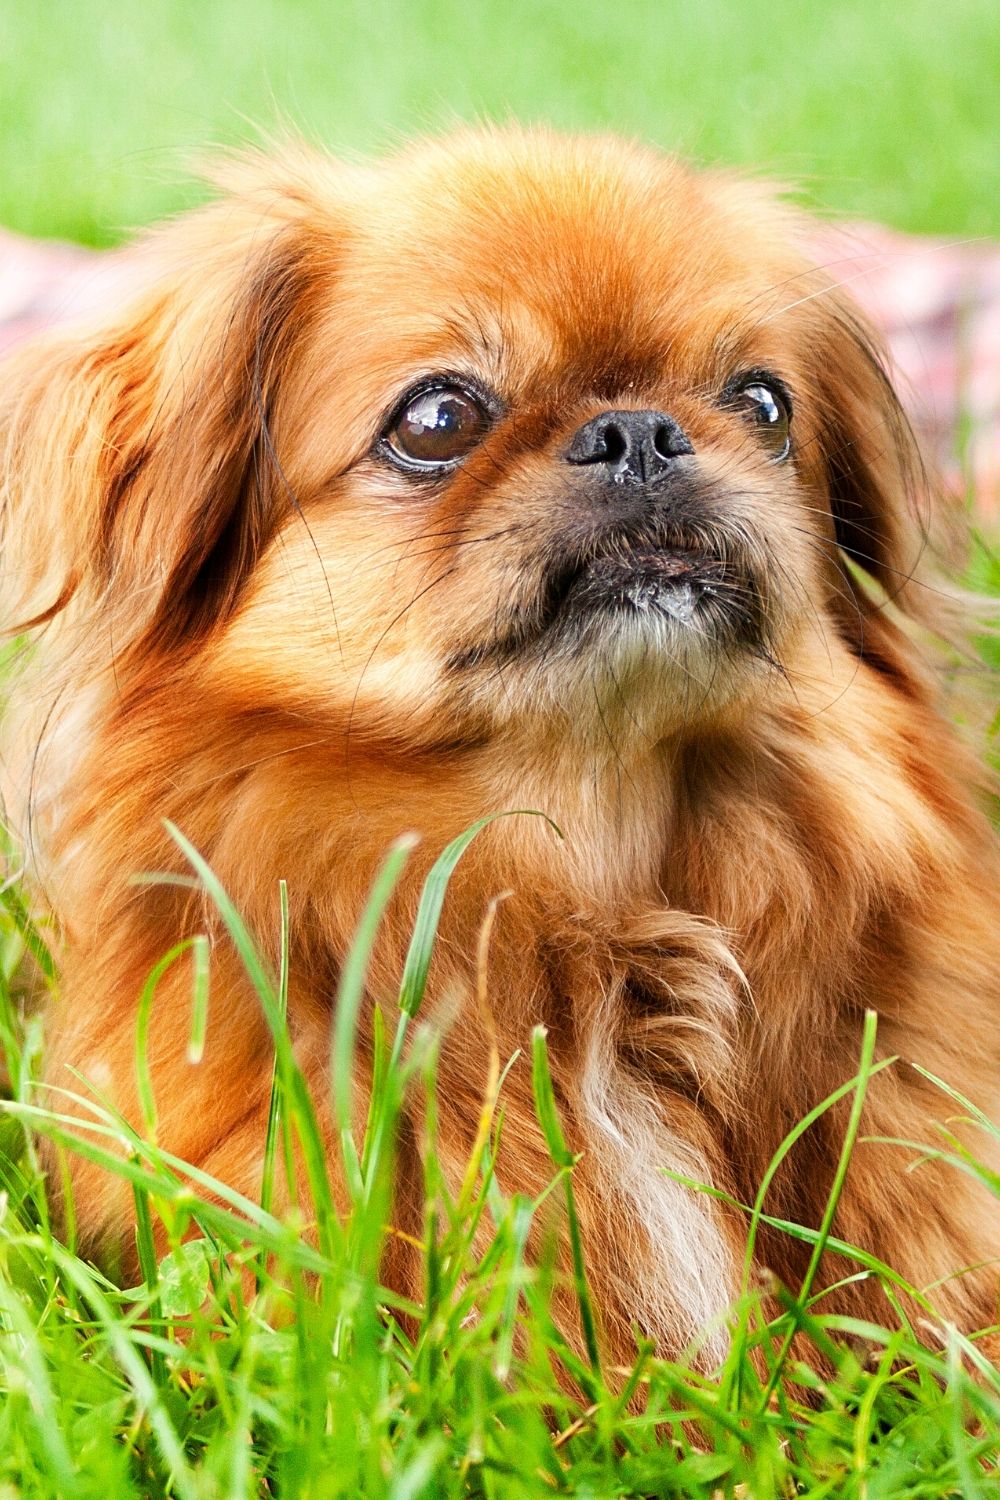 The Pekingese, though not a close resemblance to the Ewoks from Star Wars, is another dog breed that you can consider to care for 